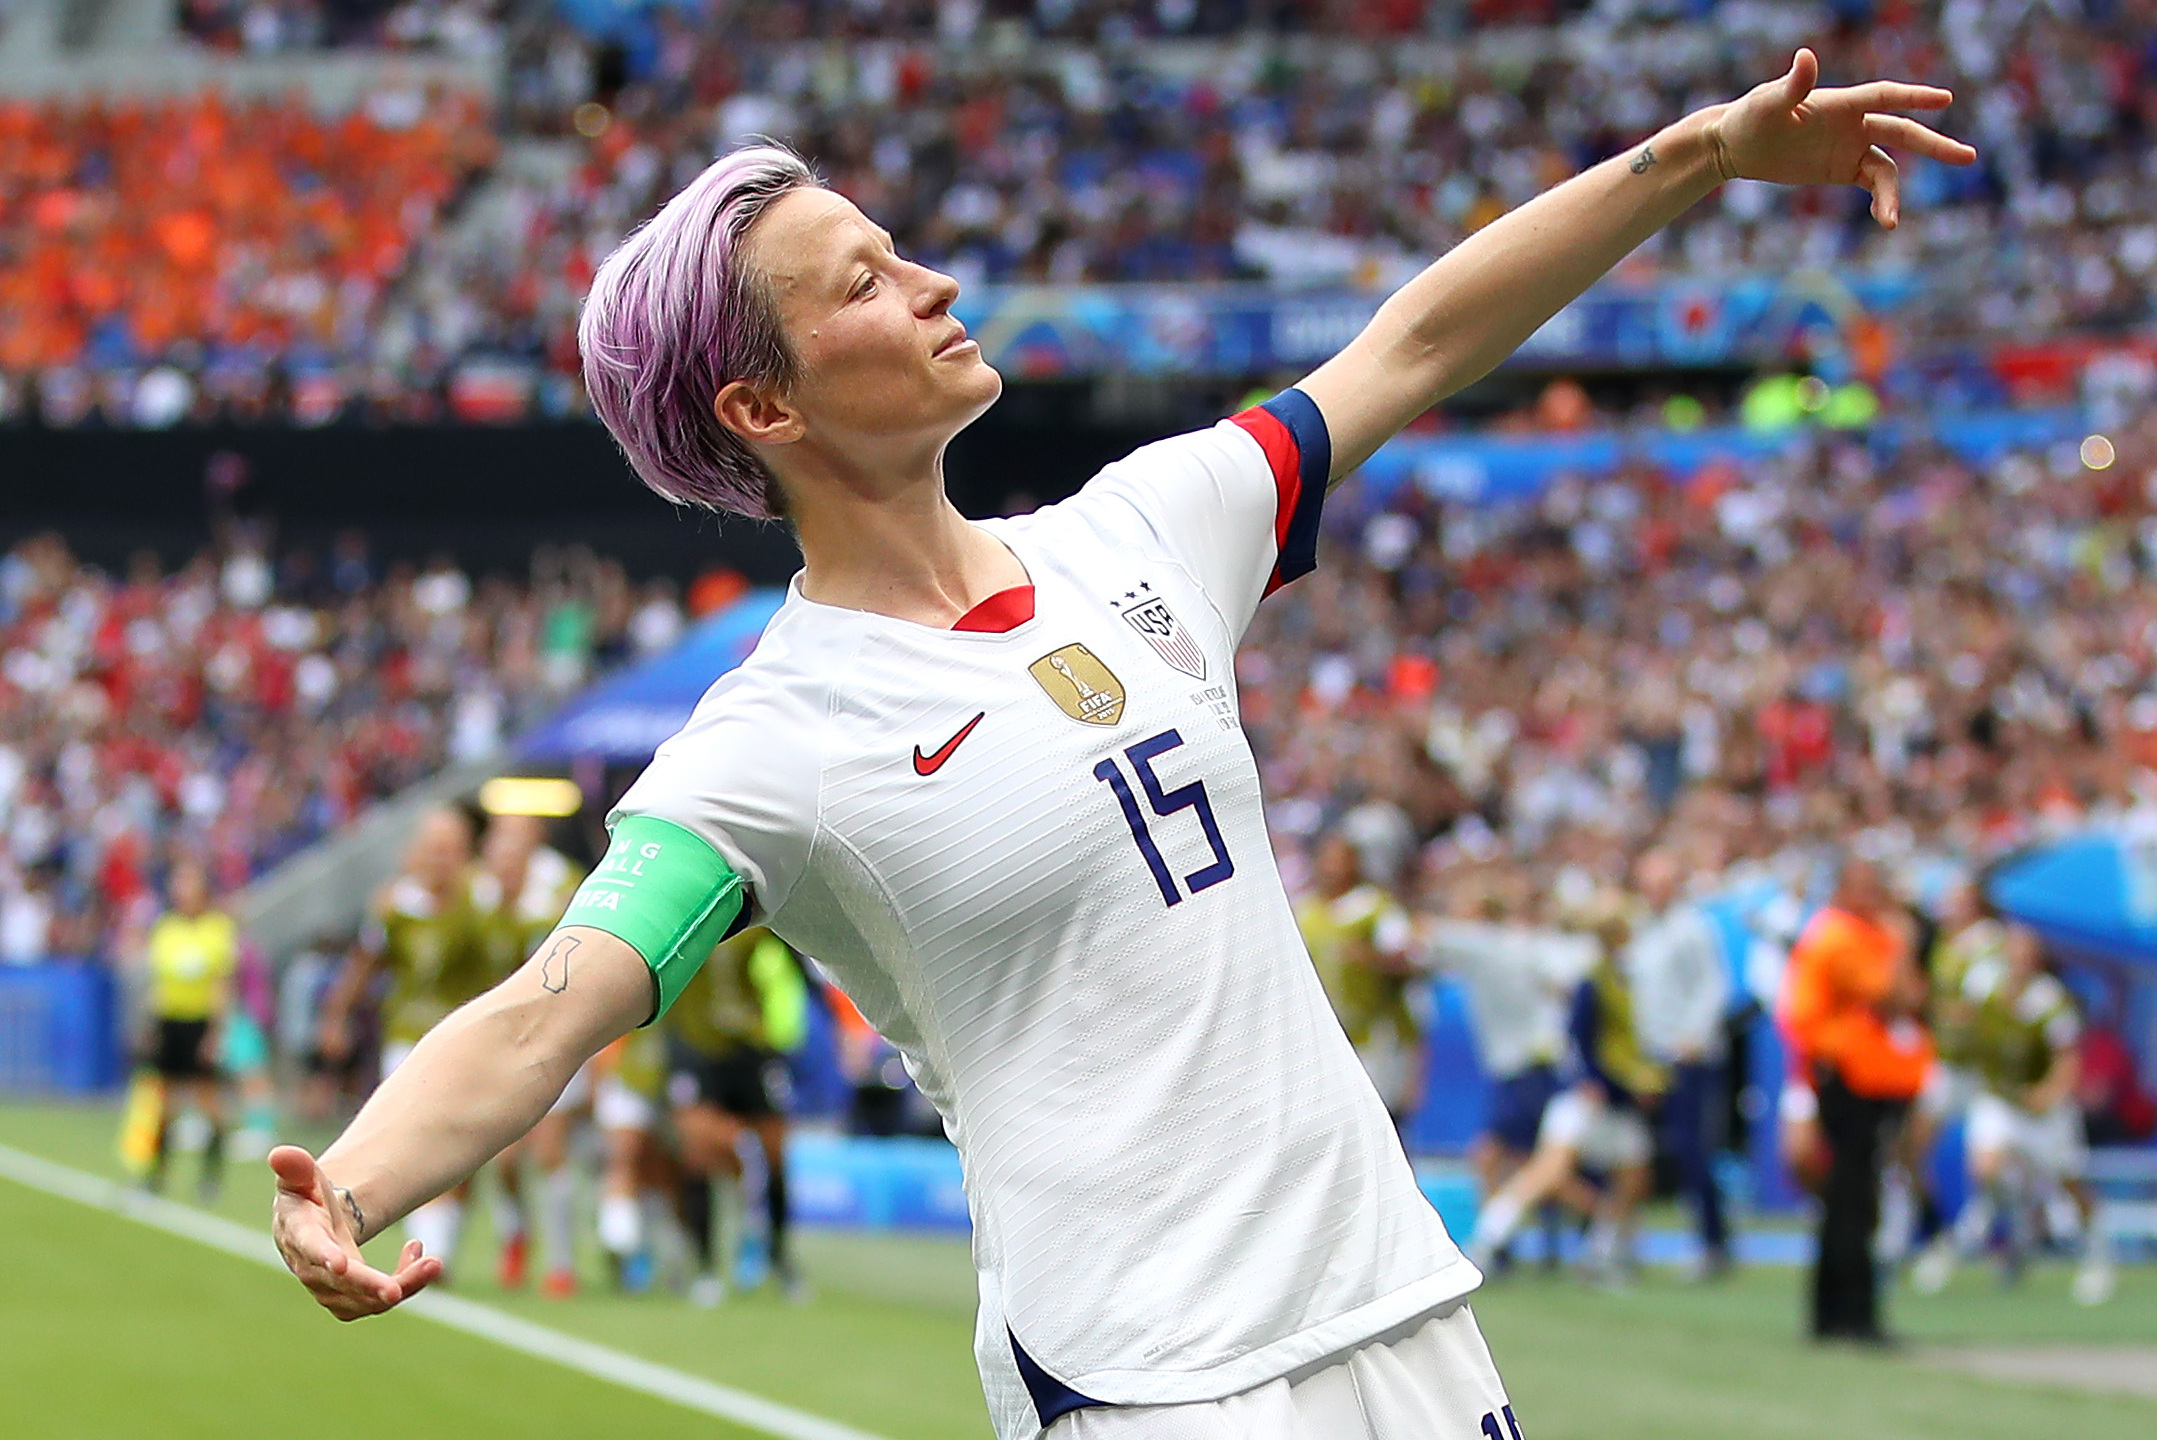 Megan Rapinoe Announced As Sis 2019 Sportsperson Of The Year 